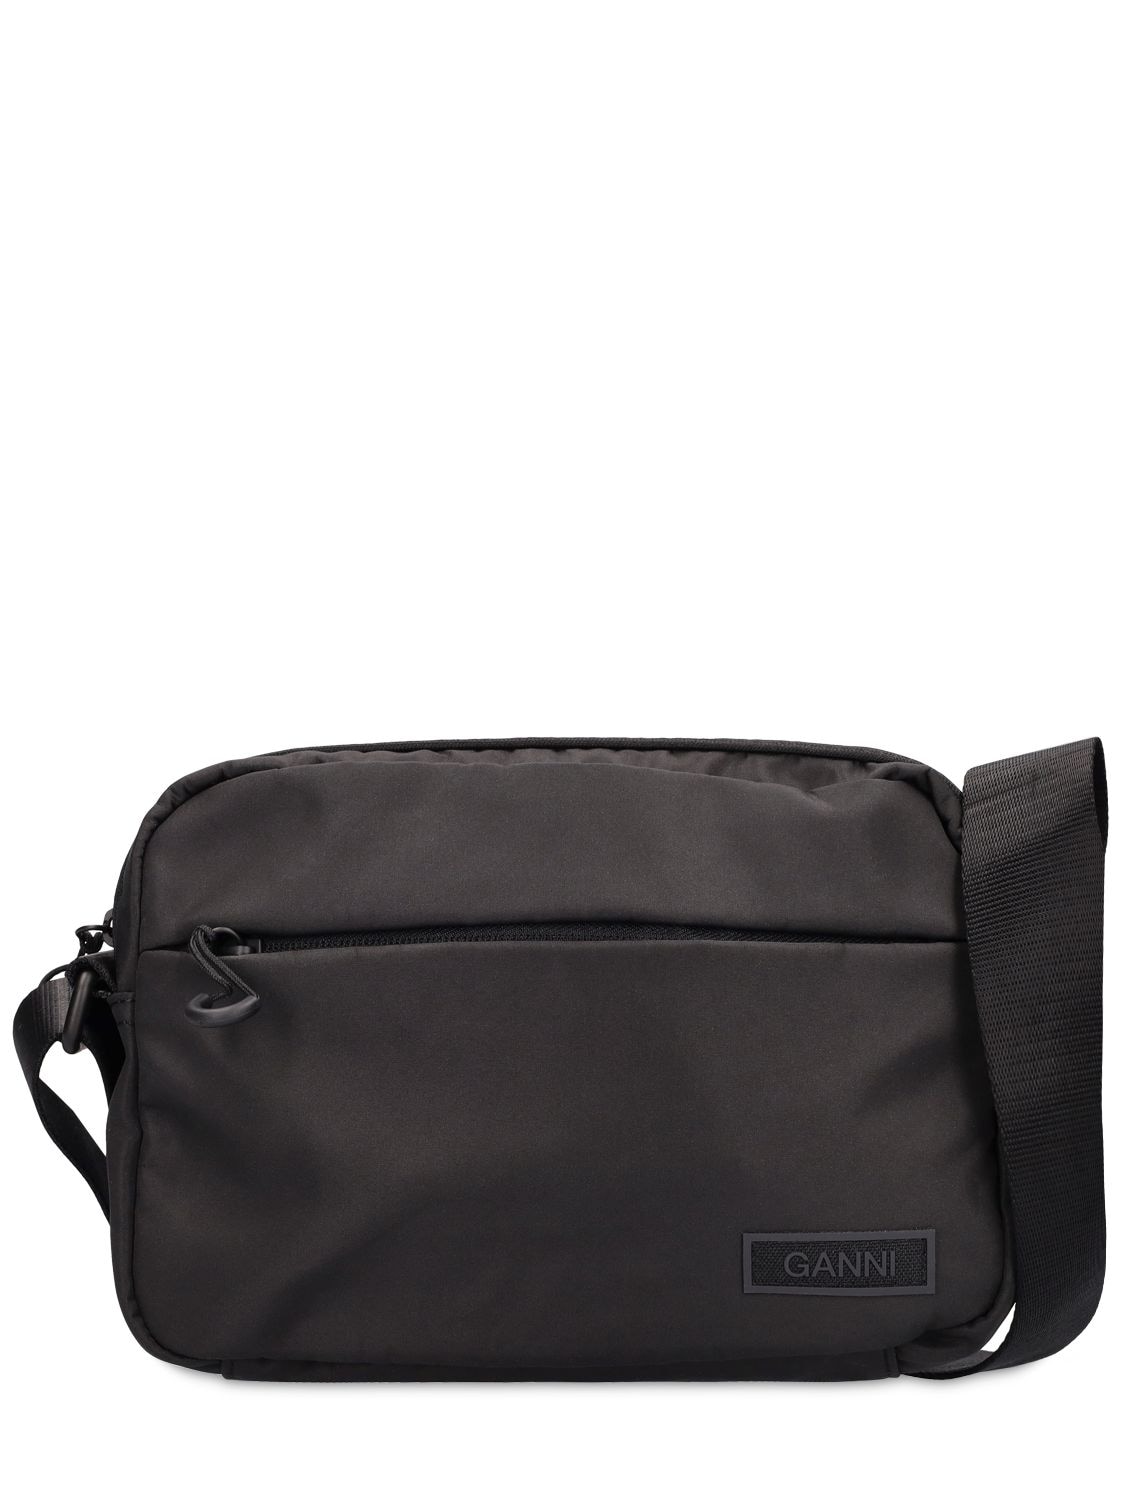 GANNI Small Recycled Tech Shoulder Bag